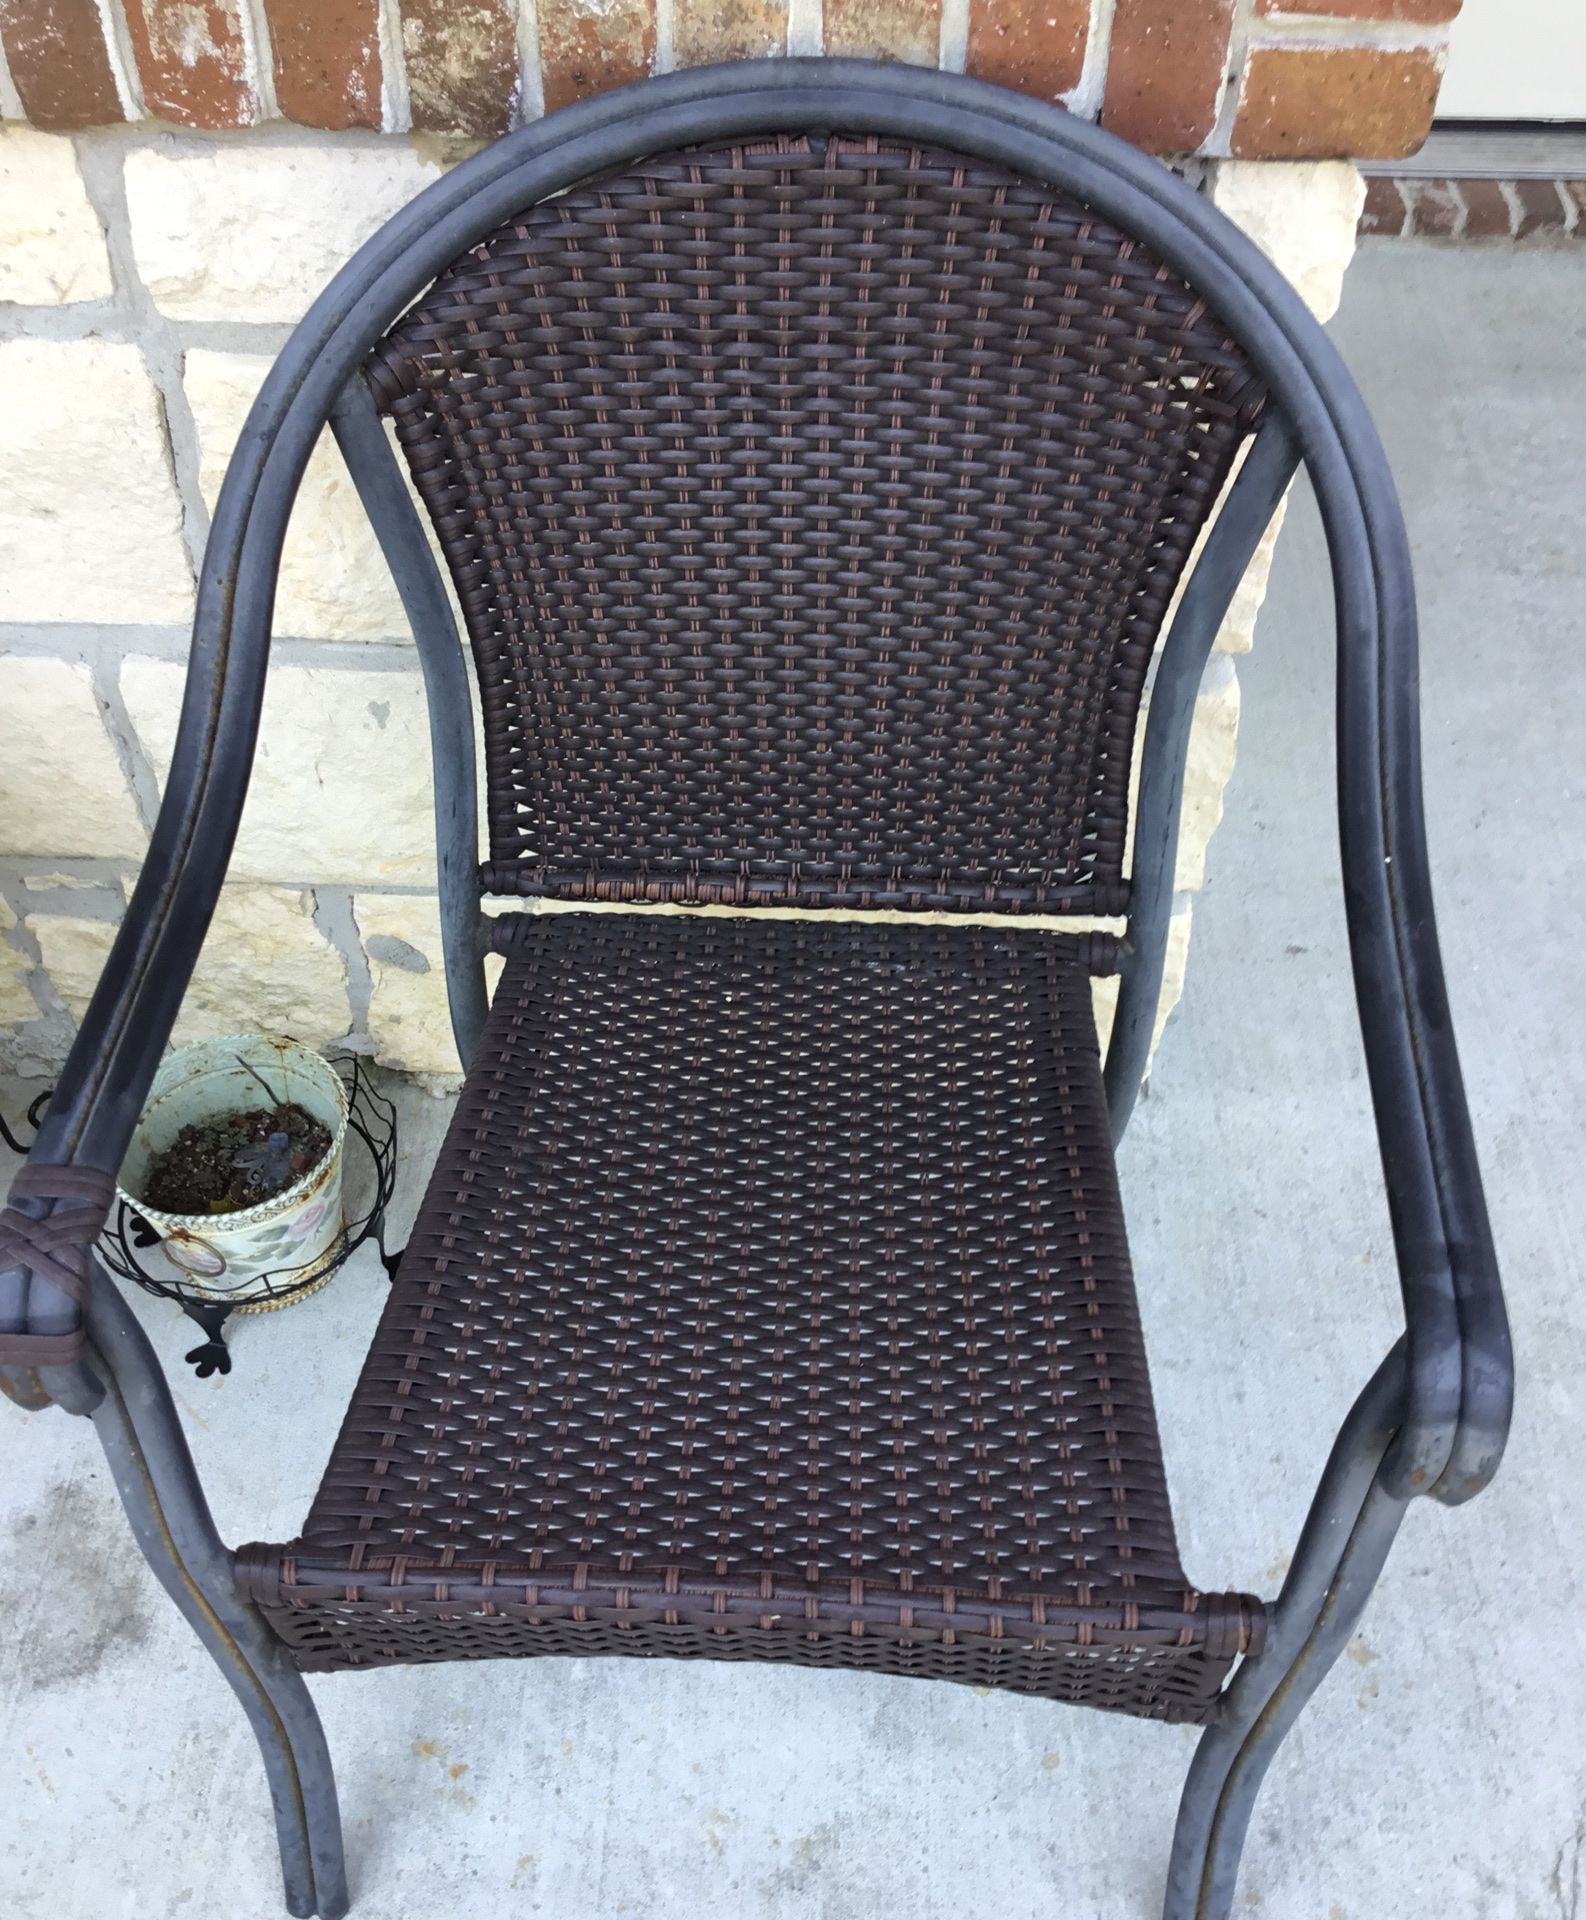 SET OF [2] OUTDOOR PATIO USED RATTAN WOVEN CHAIRS...SELLING AS A SET...CONDITION IS GOOD/STURDY ...30.00 FOR THE SET??